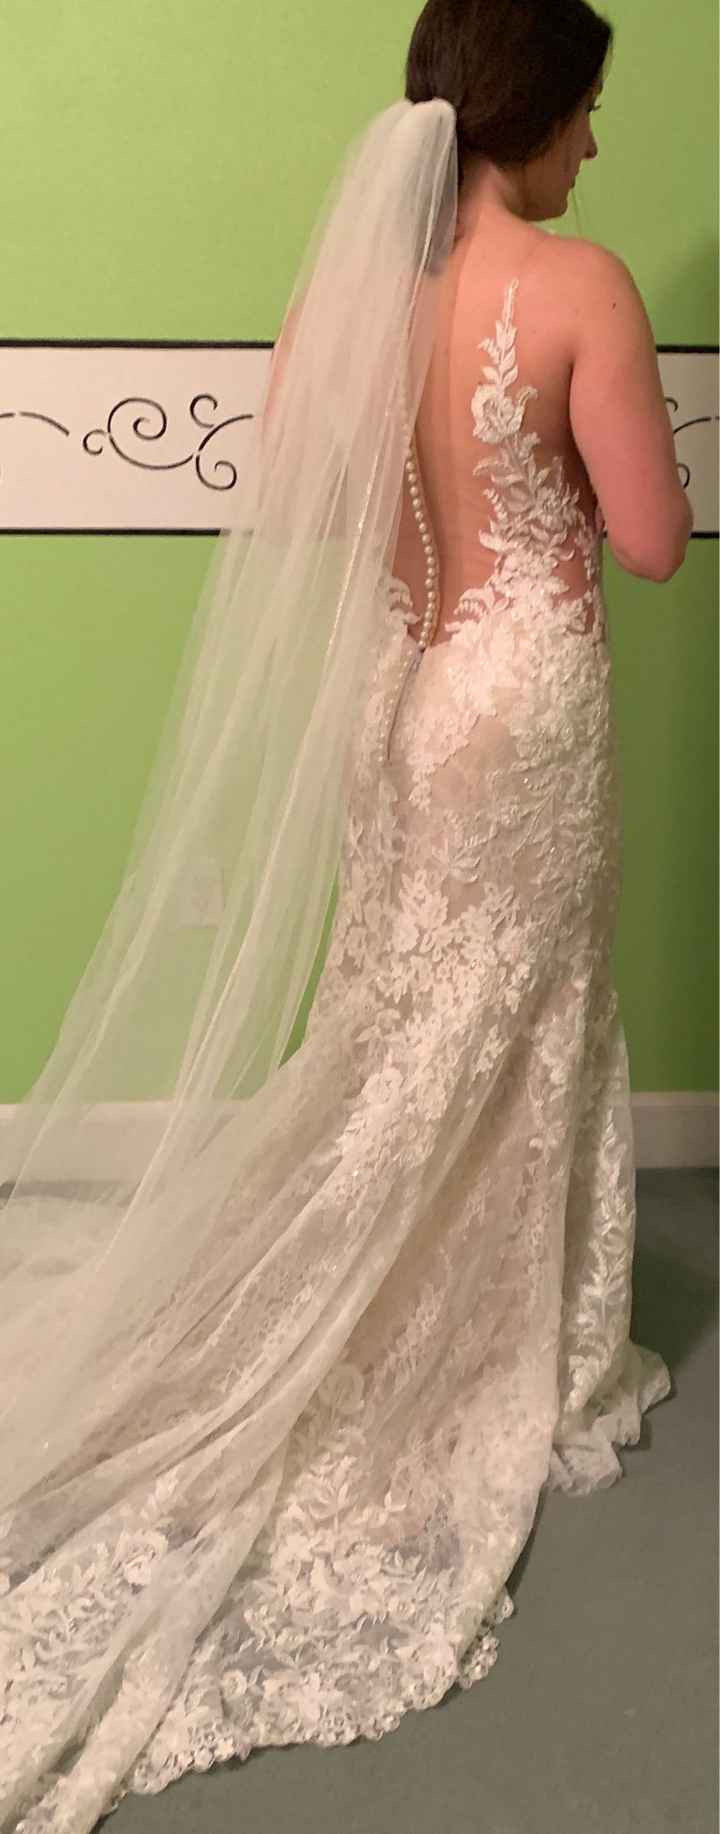 What's your favorite part of your wedding dress? 😍 - 1